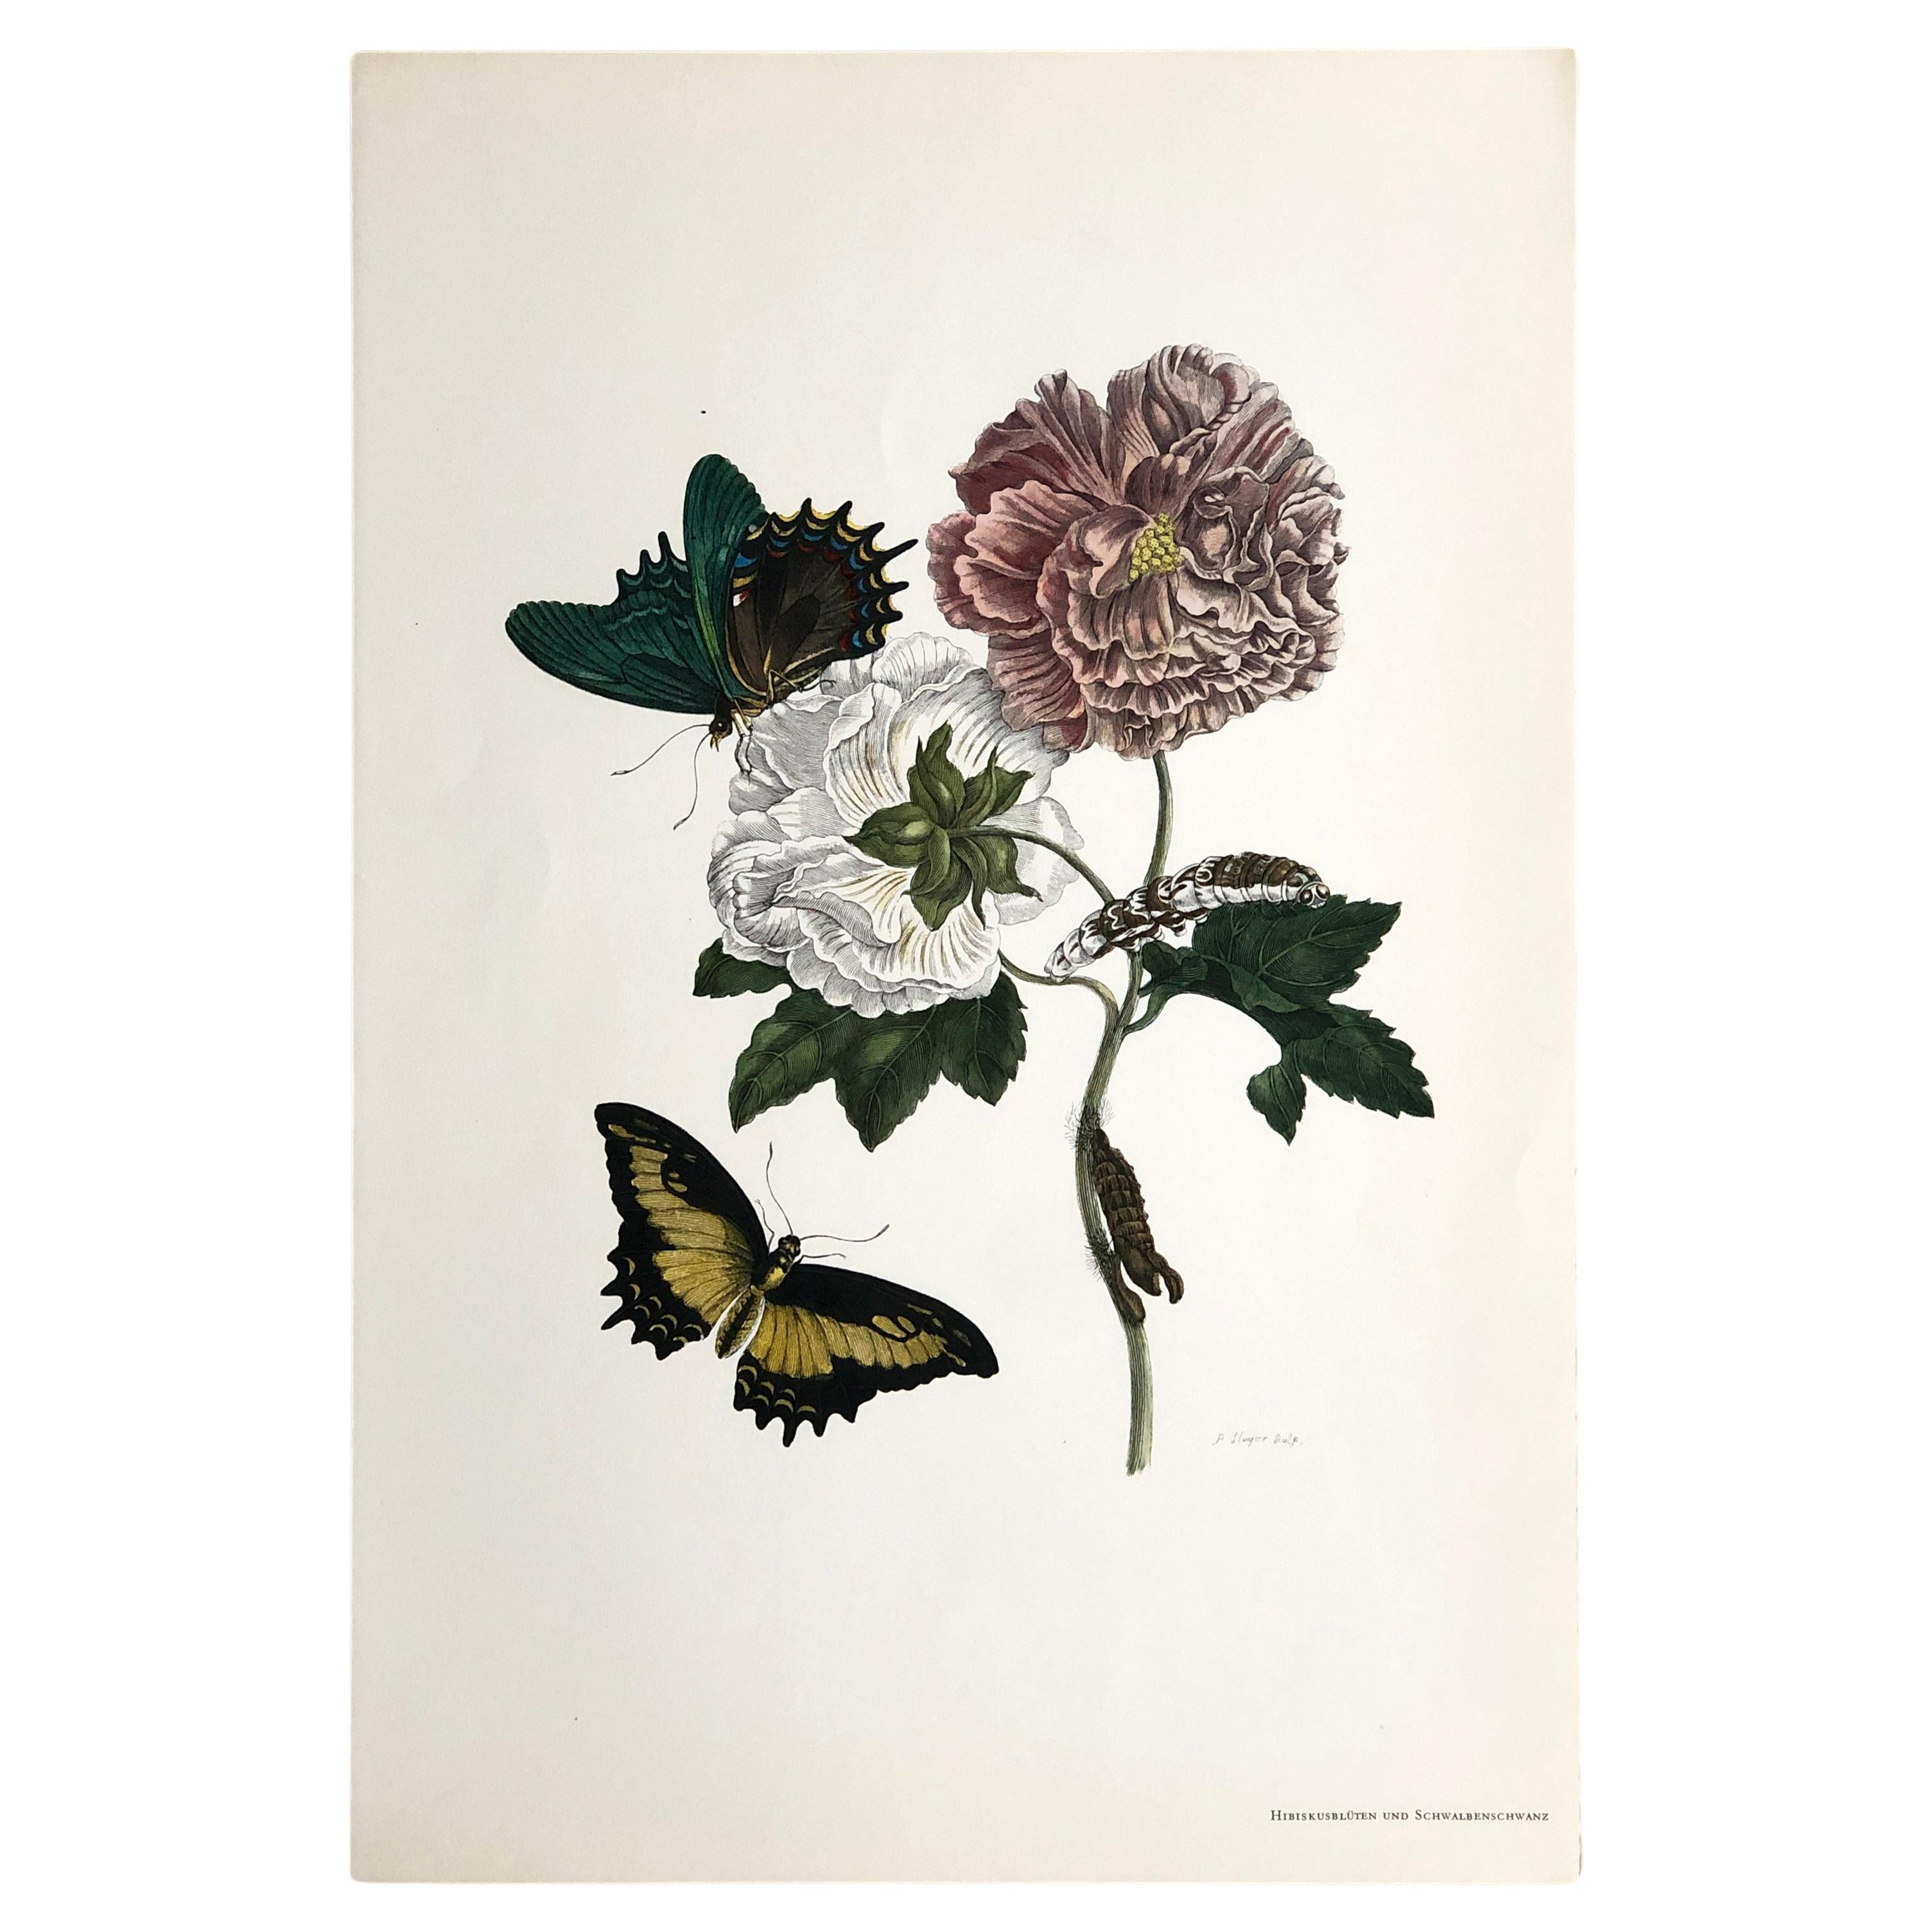 Maria Sibylla Merian - P. Sluyter - Hibiscus flowers and swallowtail Nr. 31 For Sale